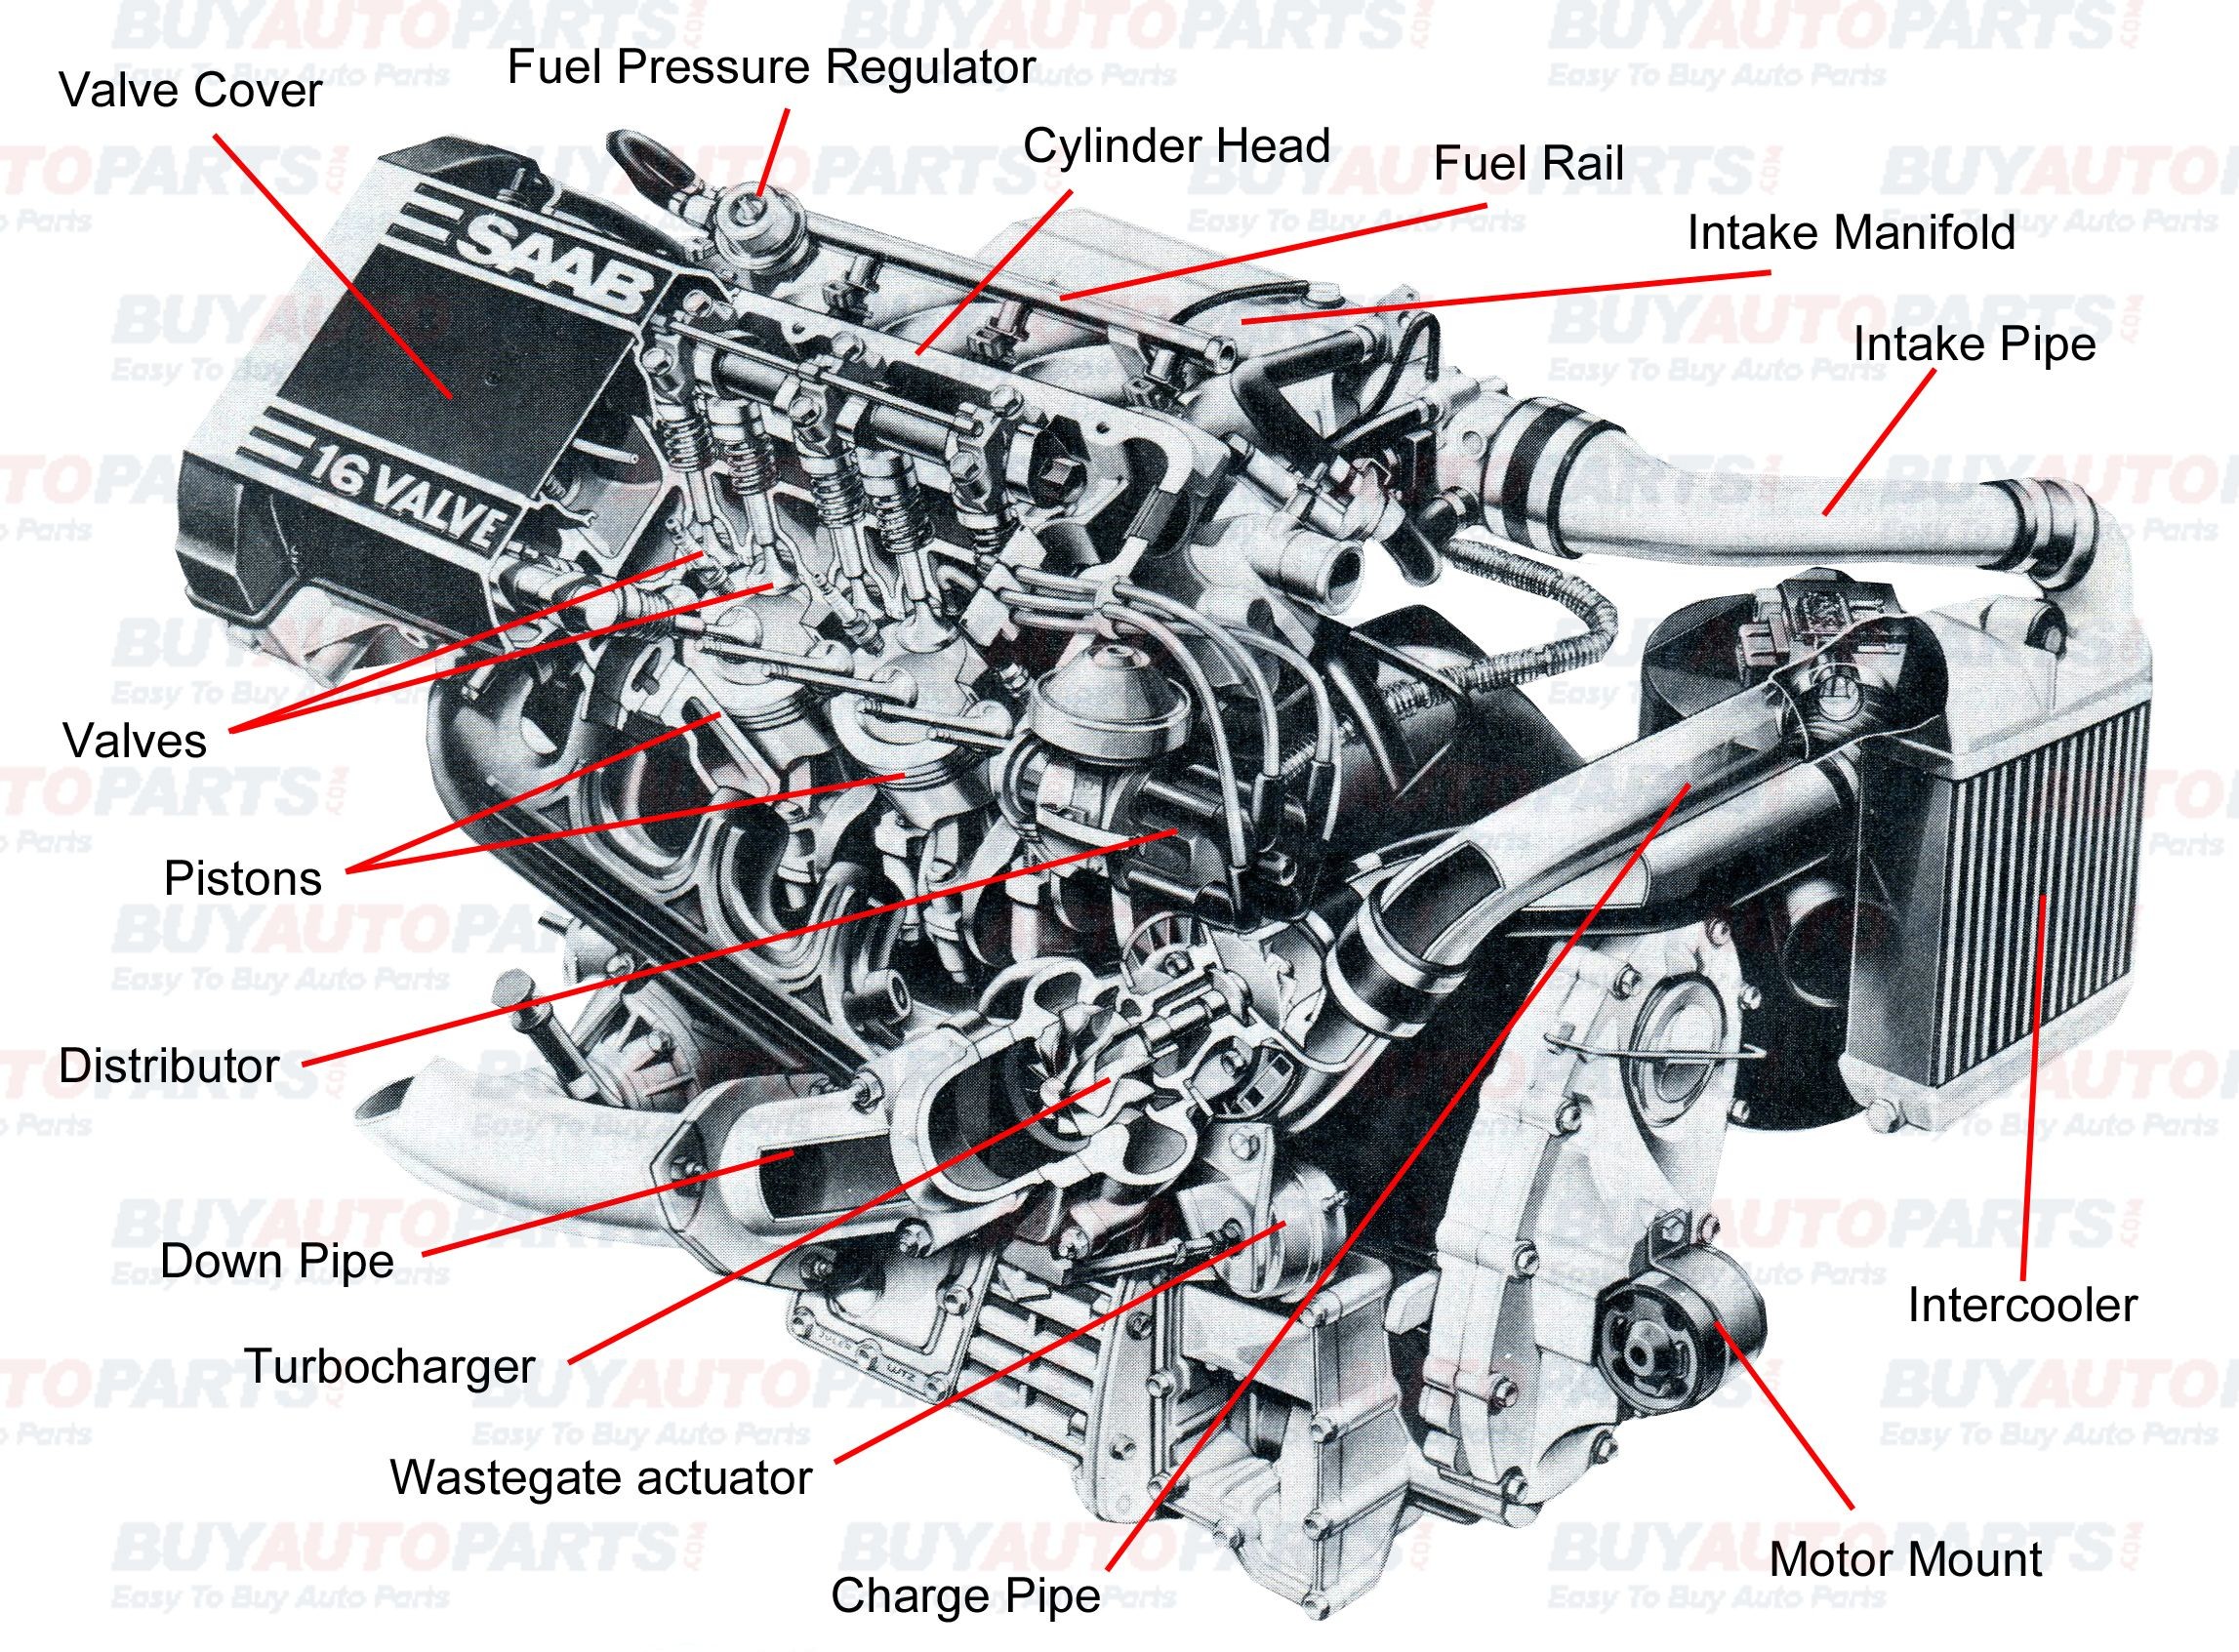 Parts Of A Car Engine Diagram Pin by Jimmiejanet Testellamwfz On What Does An Engine with Turbo